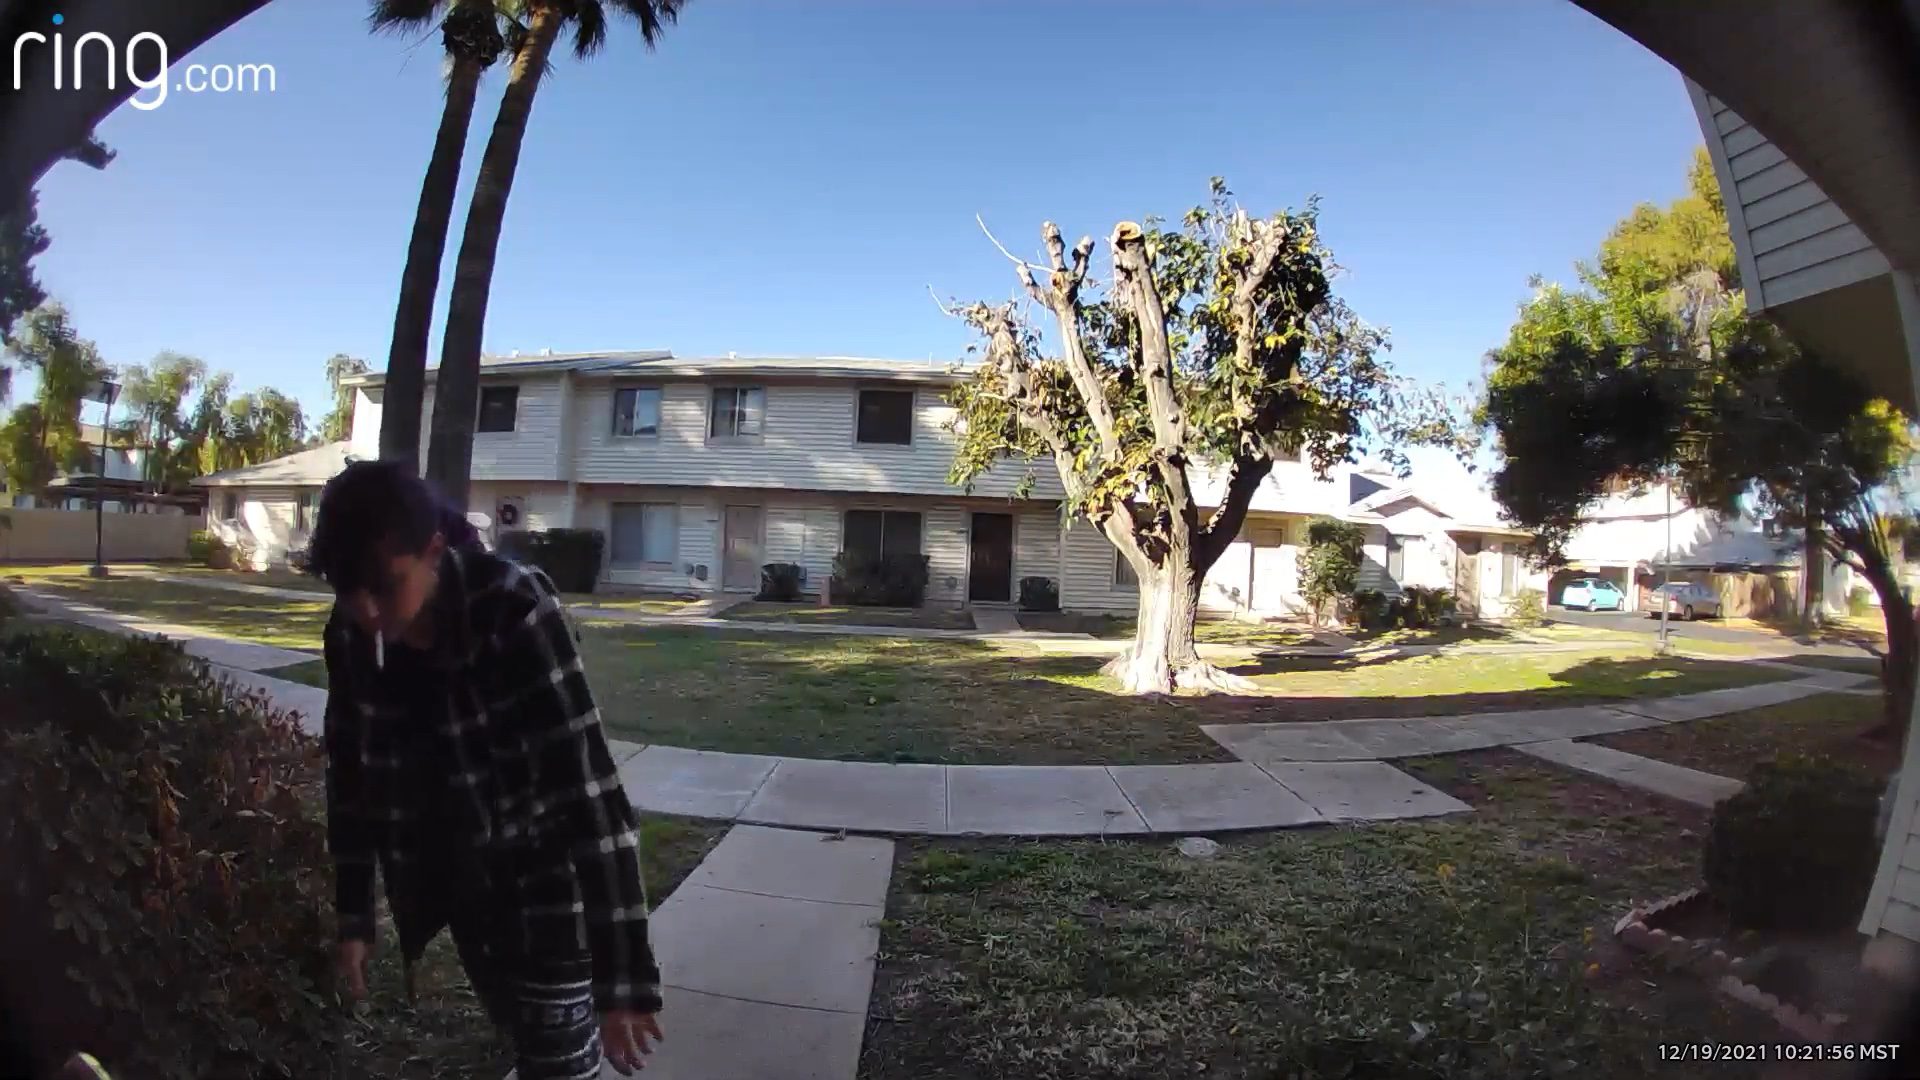 Porch Pirate Purple Polly Steals Hundreds in Packages from Tempe Home